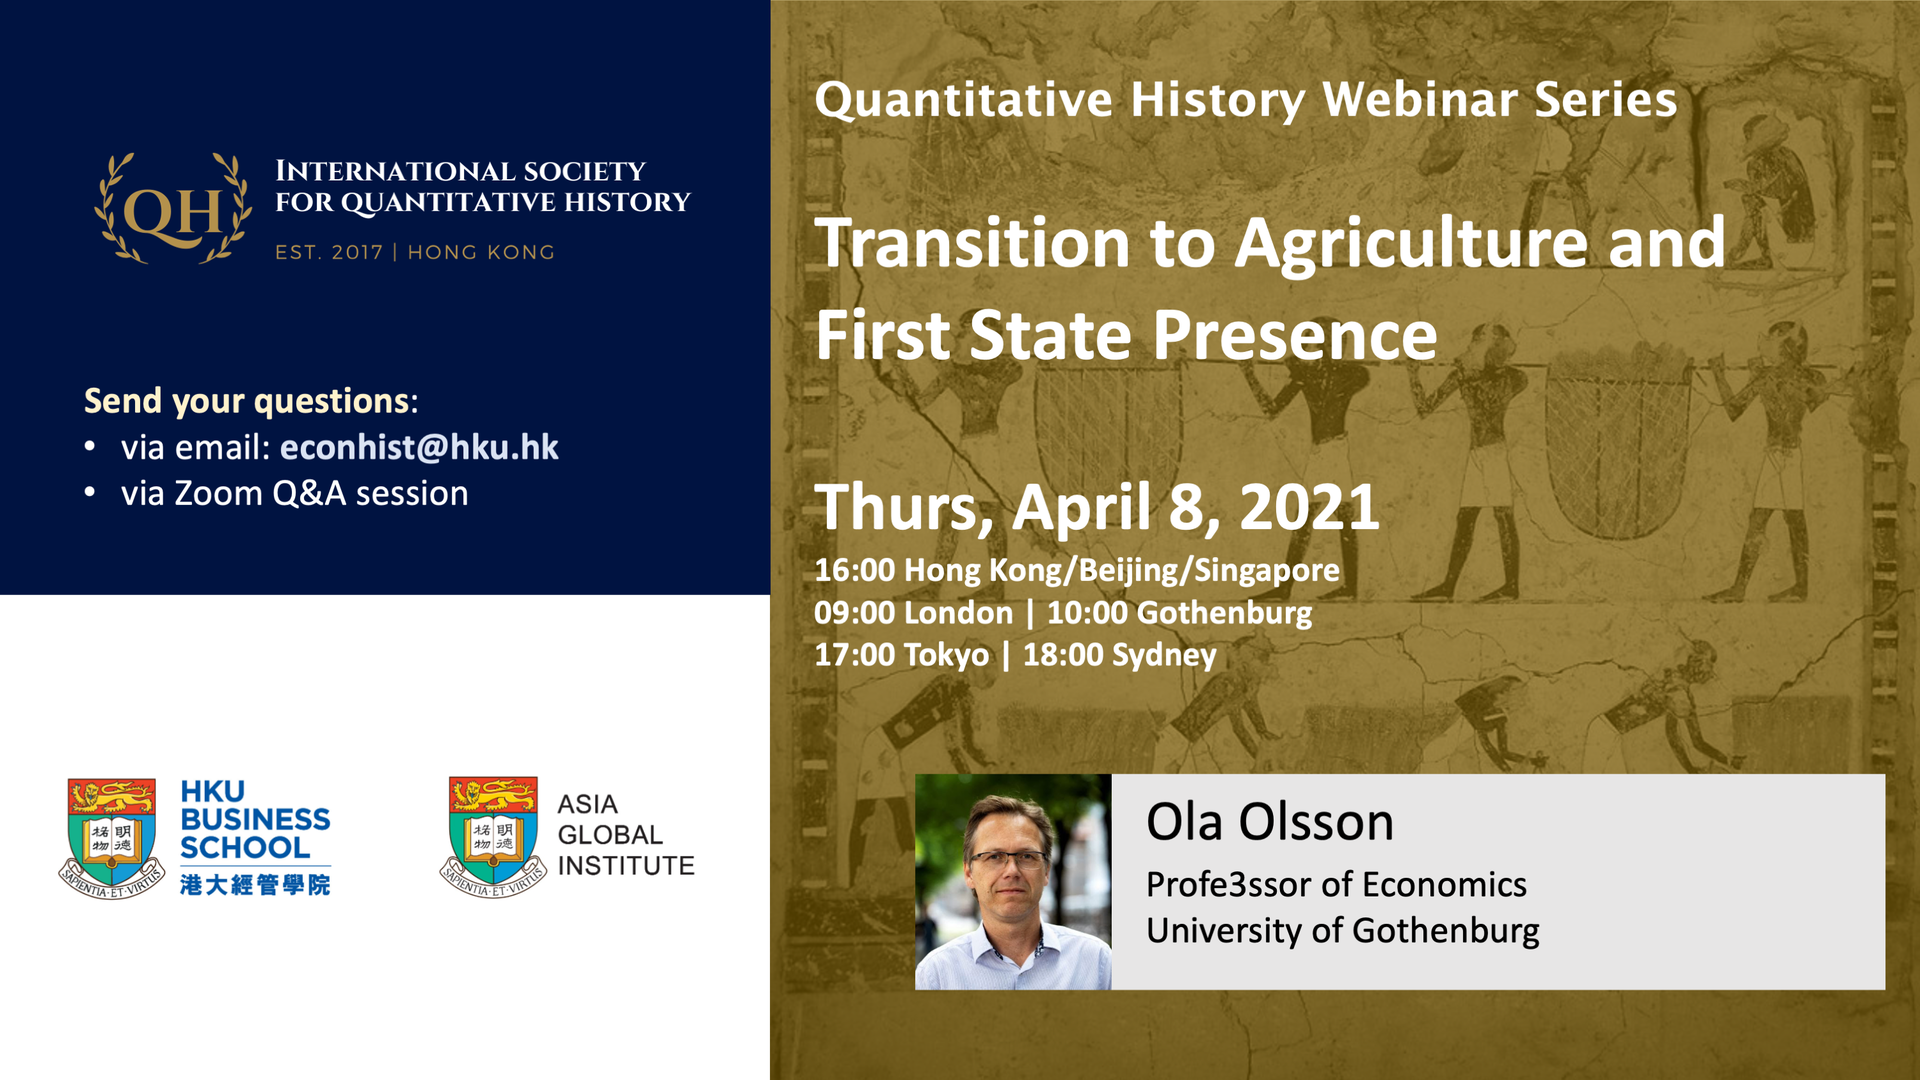 Quantitative History Webinar Series - Transition to Agriculture and First State Presence [Ola Olsson, University of Gothenburg]